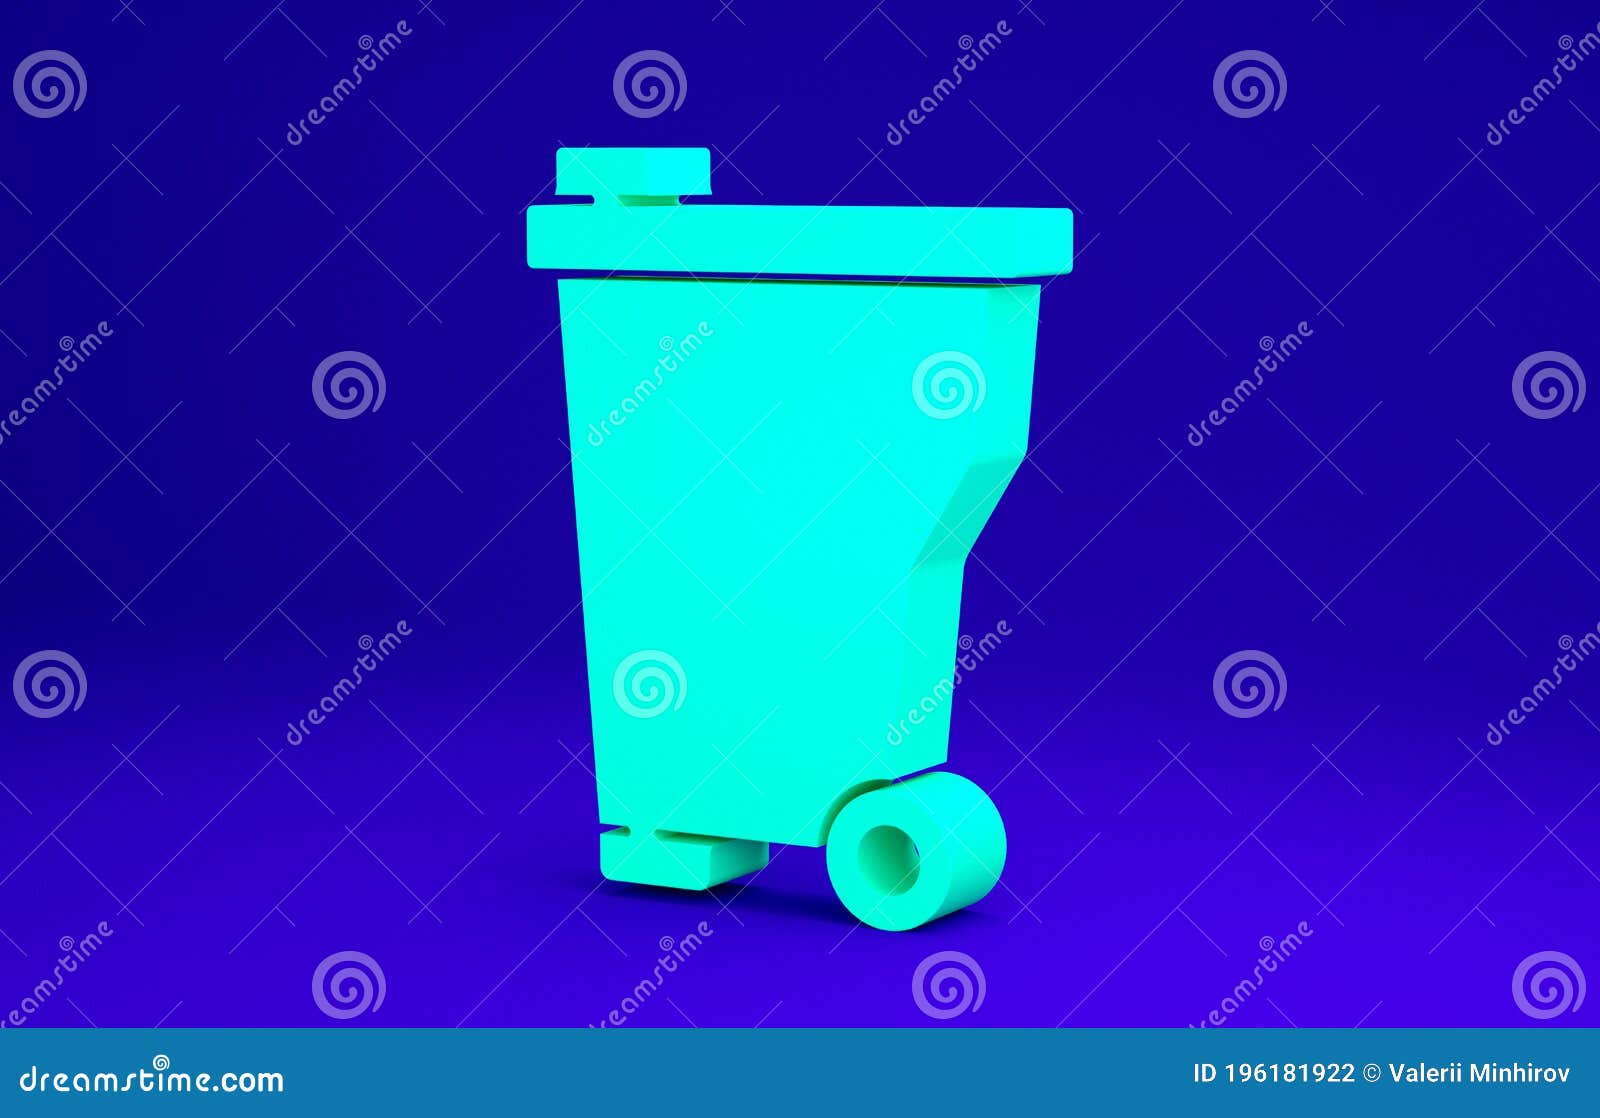 Green Trash Can Icon Isolated on Blue Background. Garbage Bin Sign ...